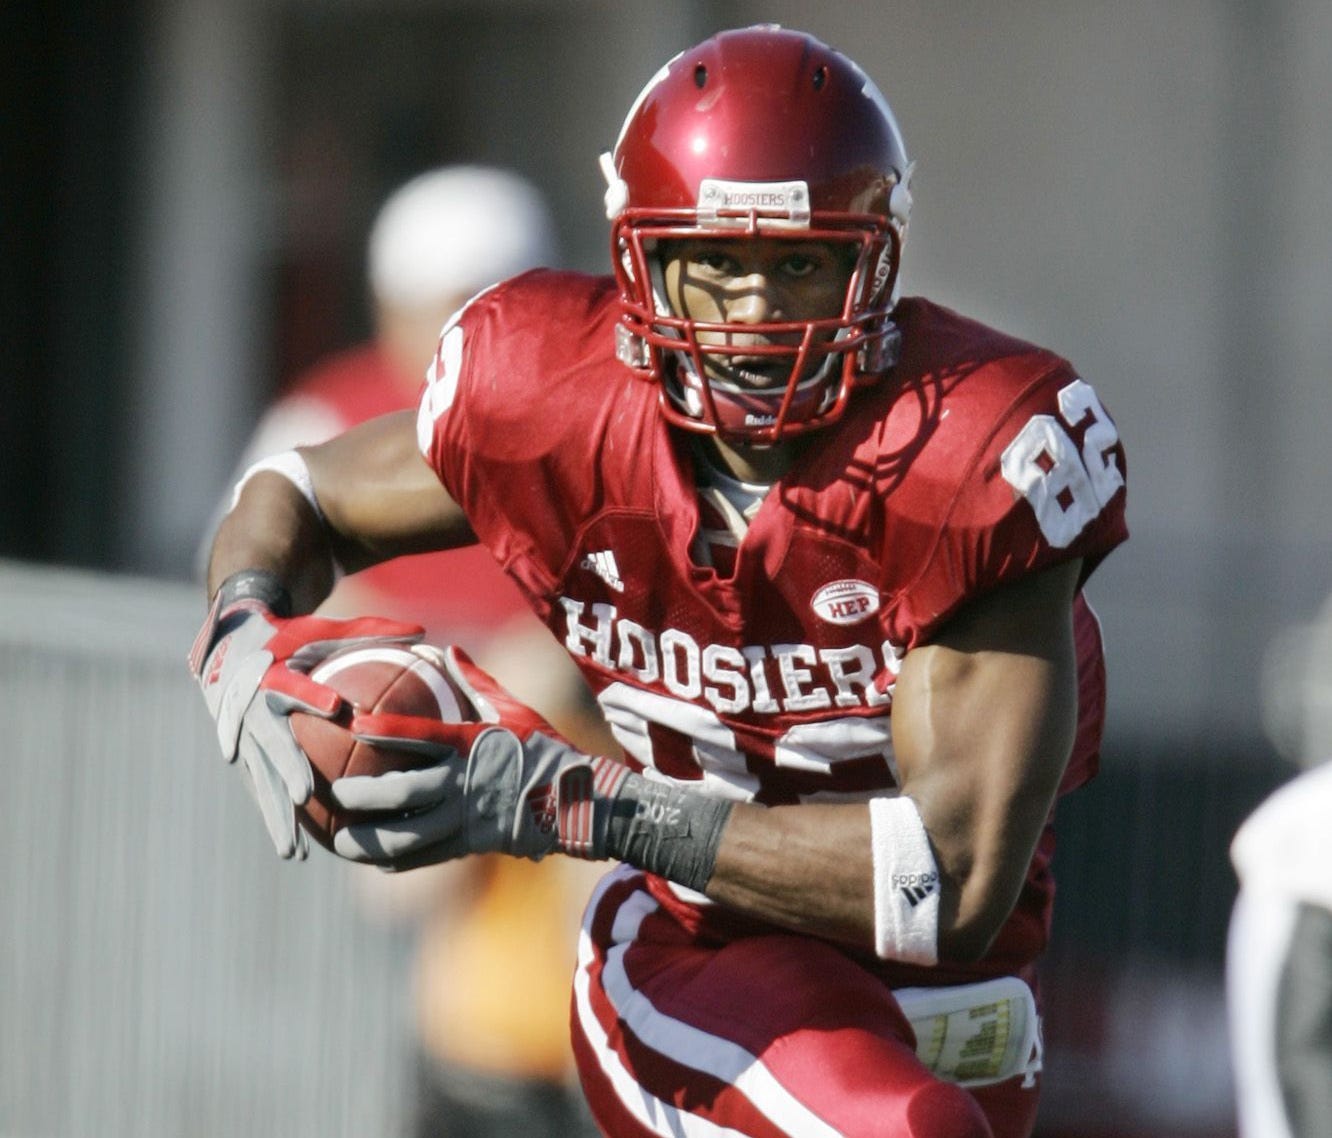 In this Nov. 3, 2007 file photo, Indiana wide receiver James Hardy runs after making a reception during the third quarter of a football game against Ball State in Bloomington, Ind.